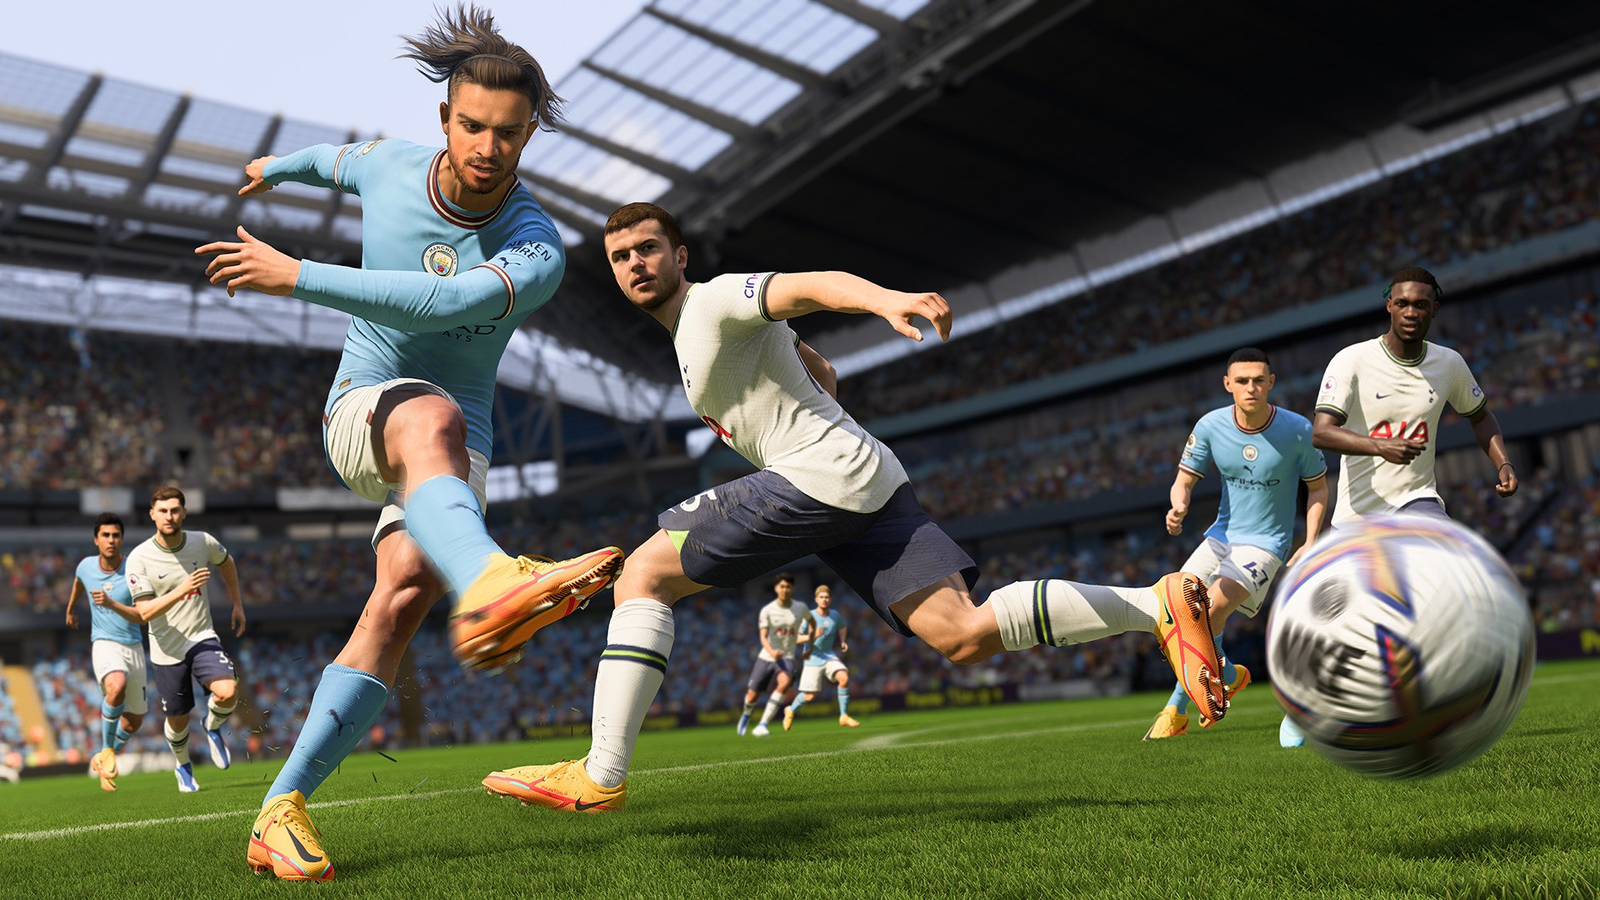 FIFA 22' release time, file size, early access, and Xbox Game Pass